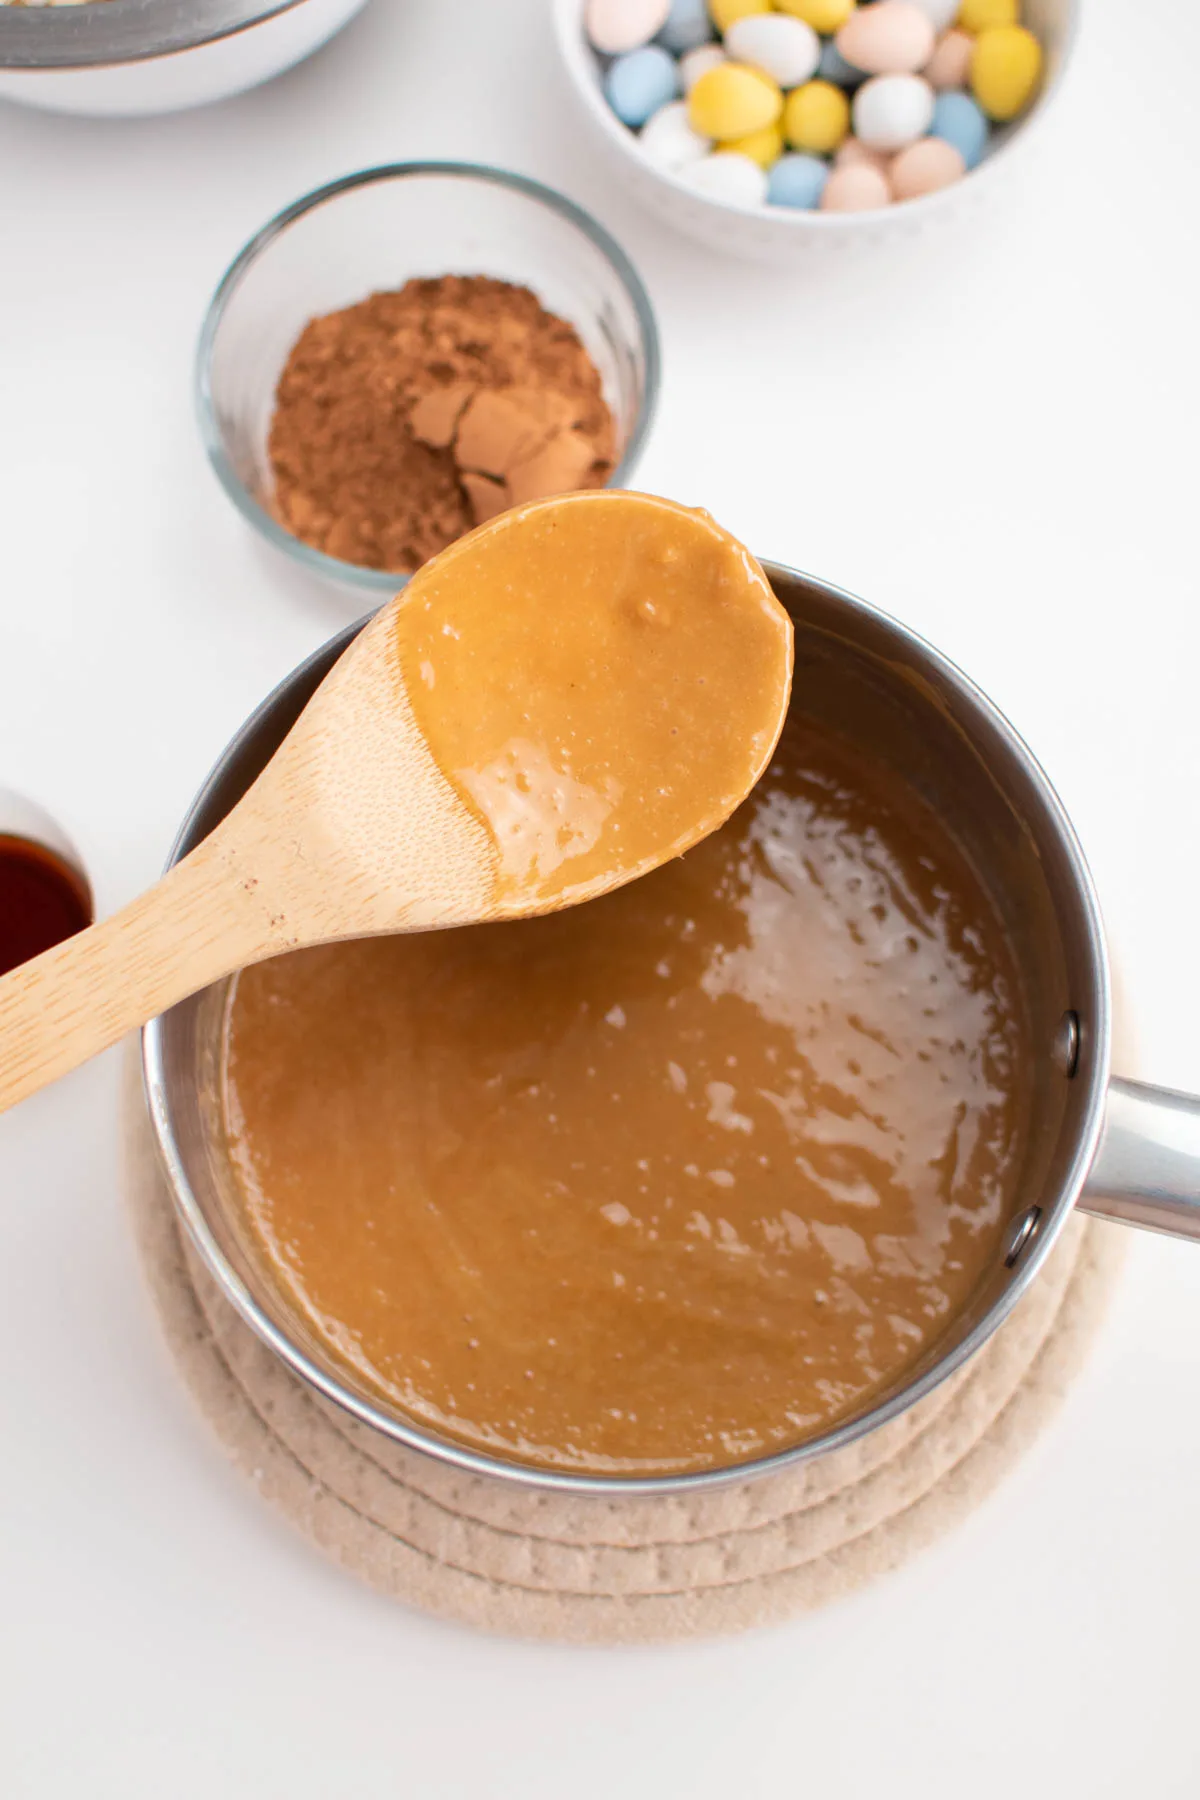 Wooden spoon with melted peanut butter resting over saucepan full of peanut butter mixture.